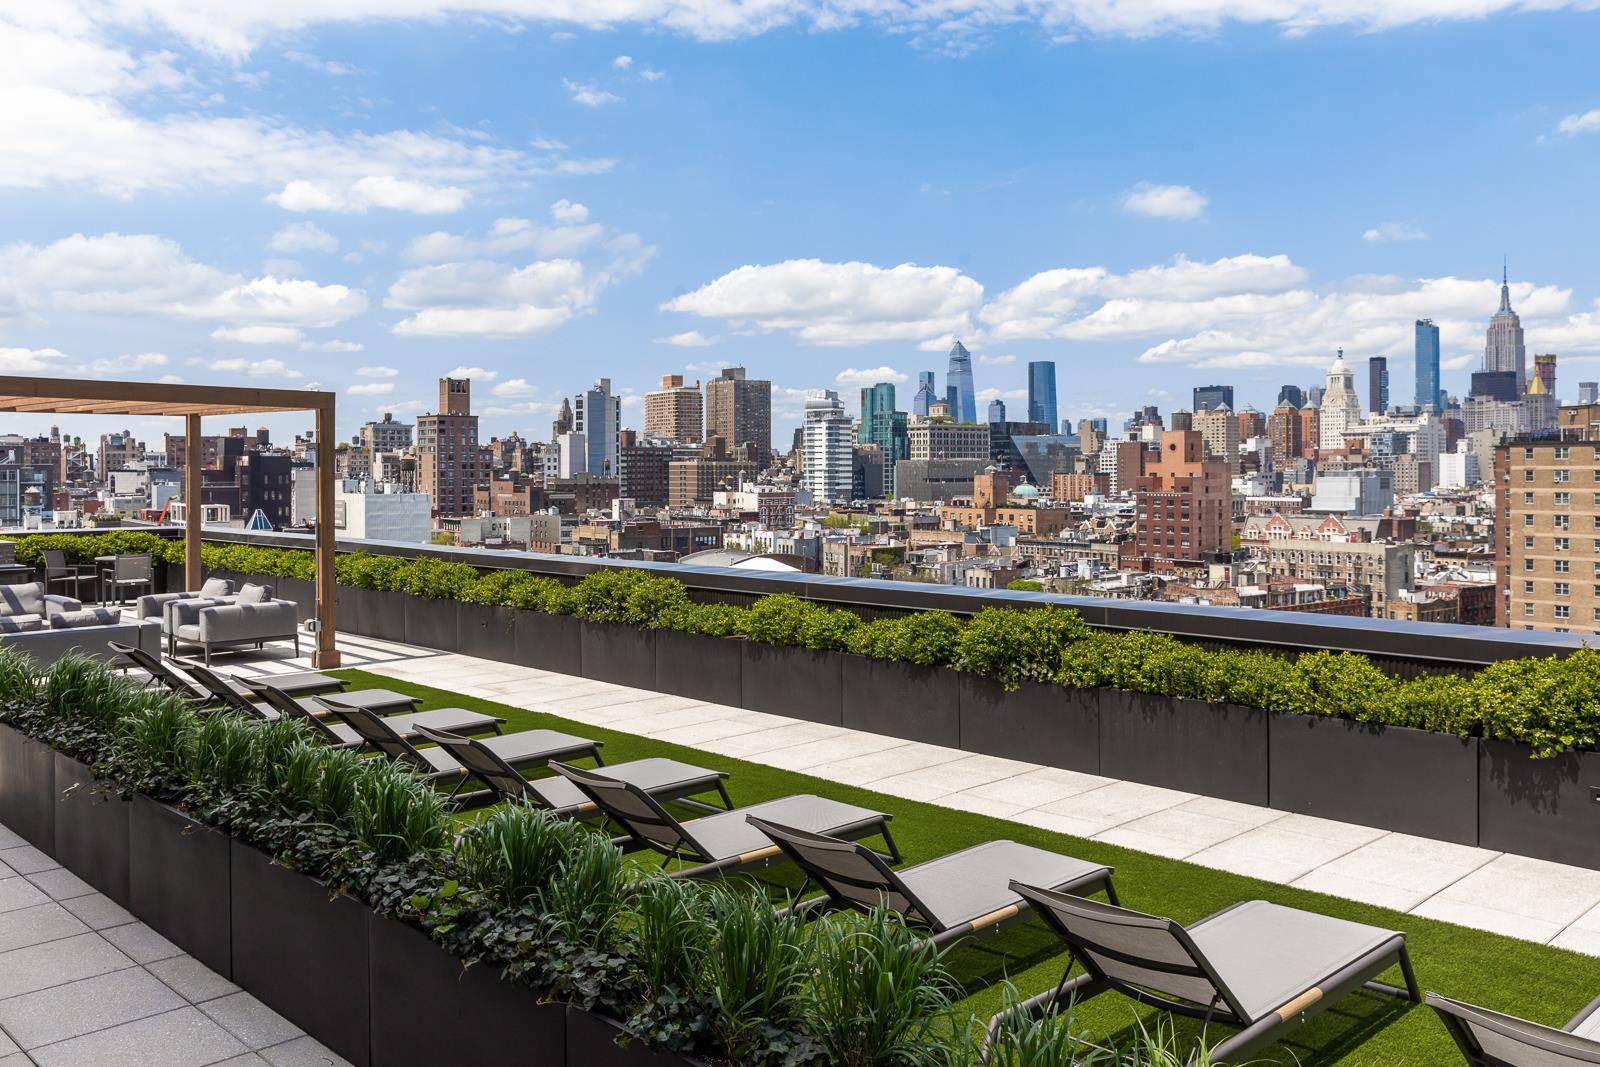 Residence 5F is a sunny, 681 square foot one bedroom with one full bath and Empire State Building views to the north through oversized casement windows surrounded in bronze, spilling ...